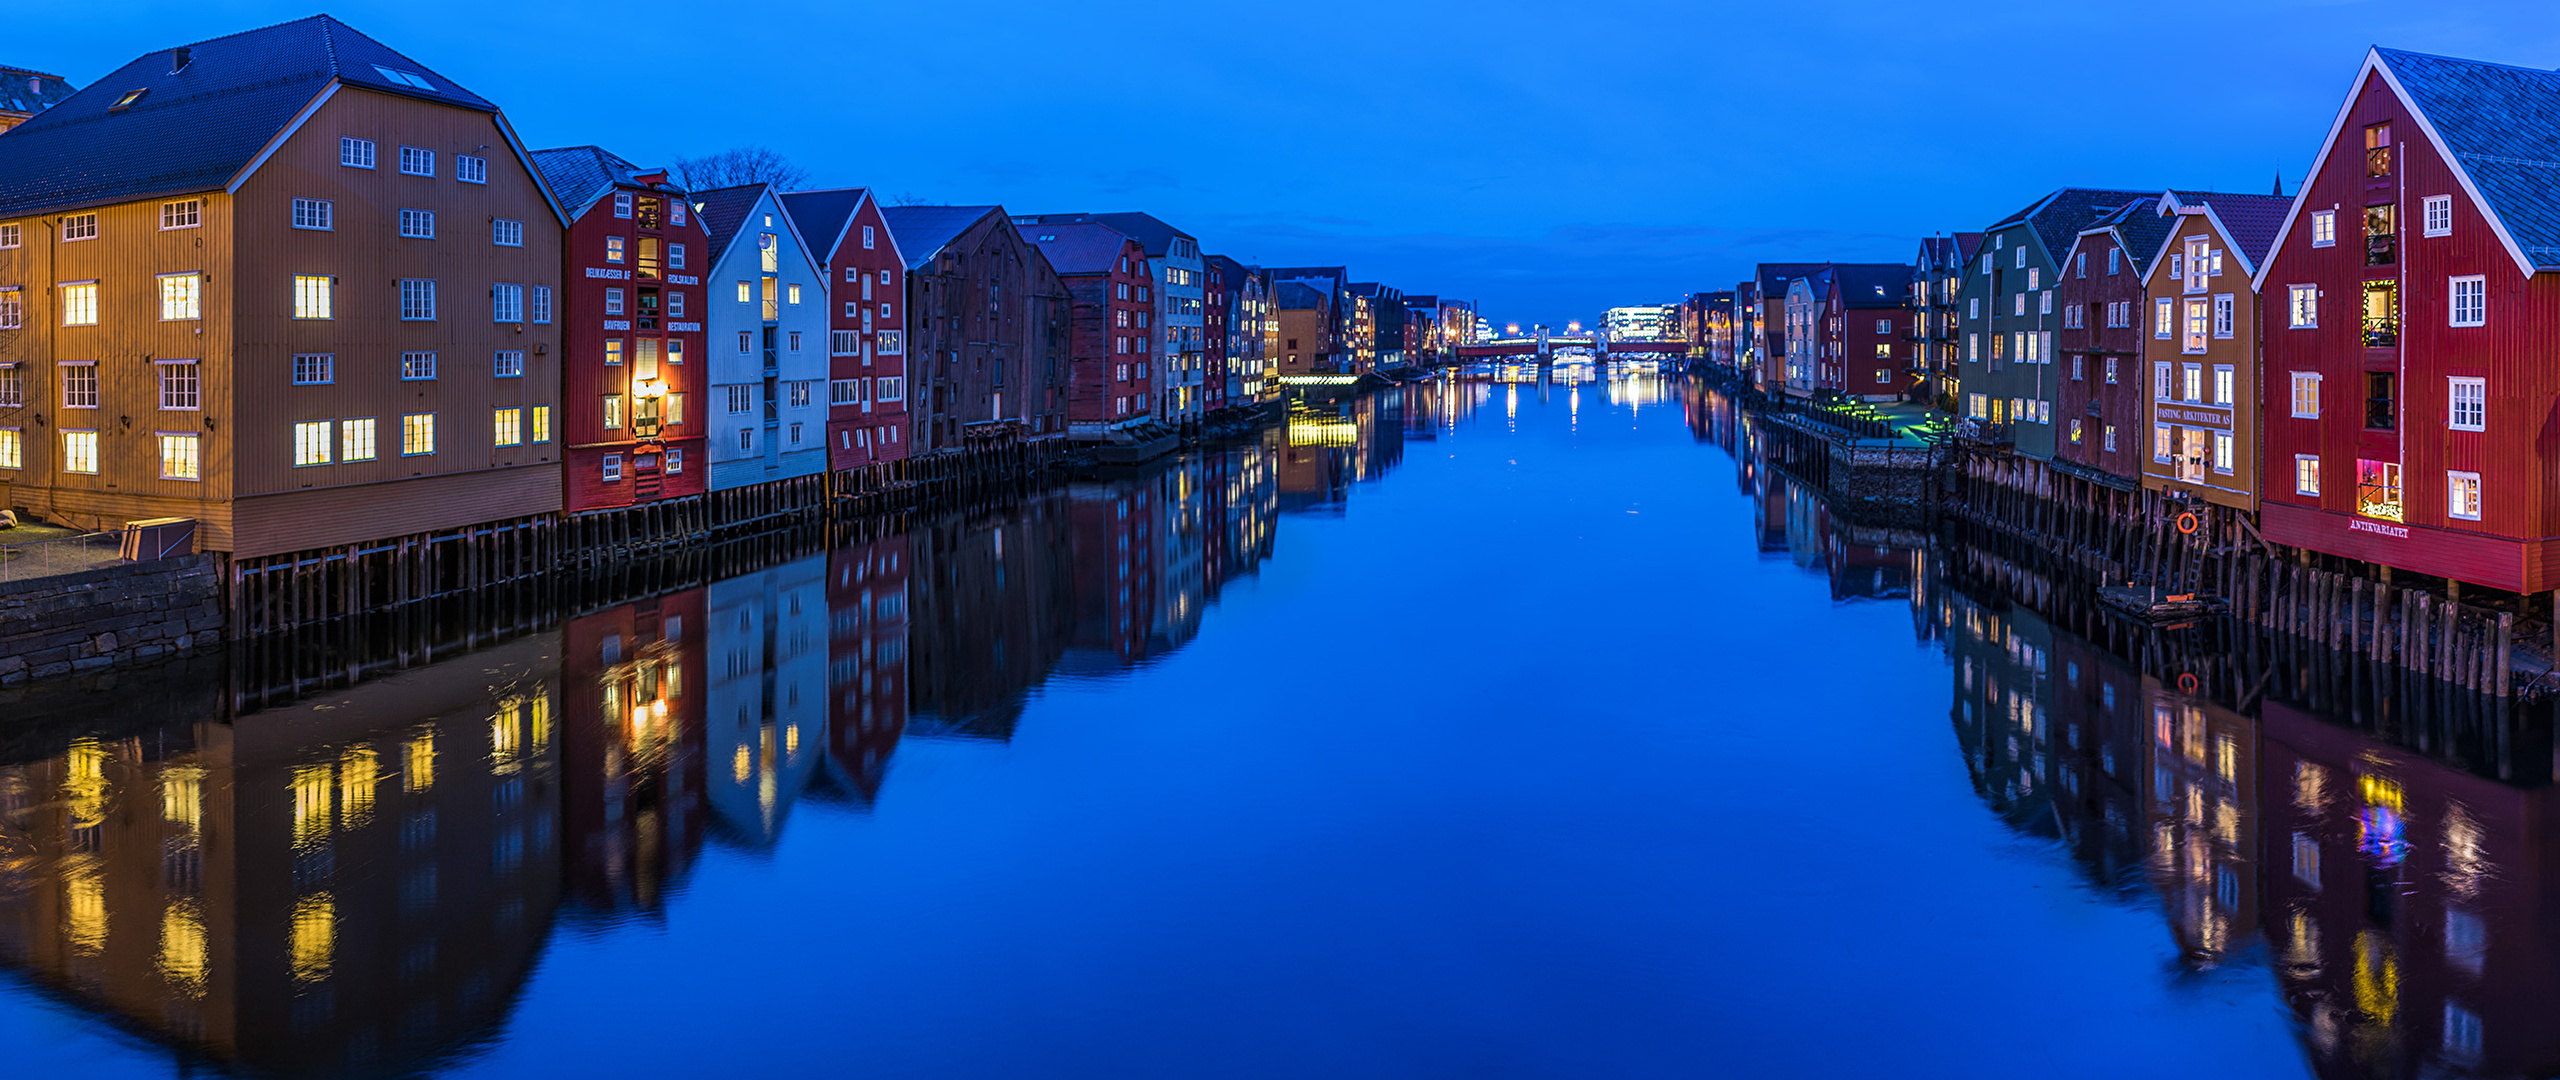 Images Norway Trondheim Canal Reflection Evening Cities 2560x1080